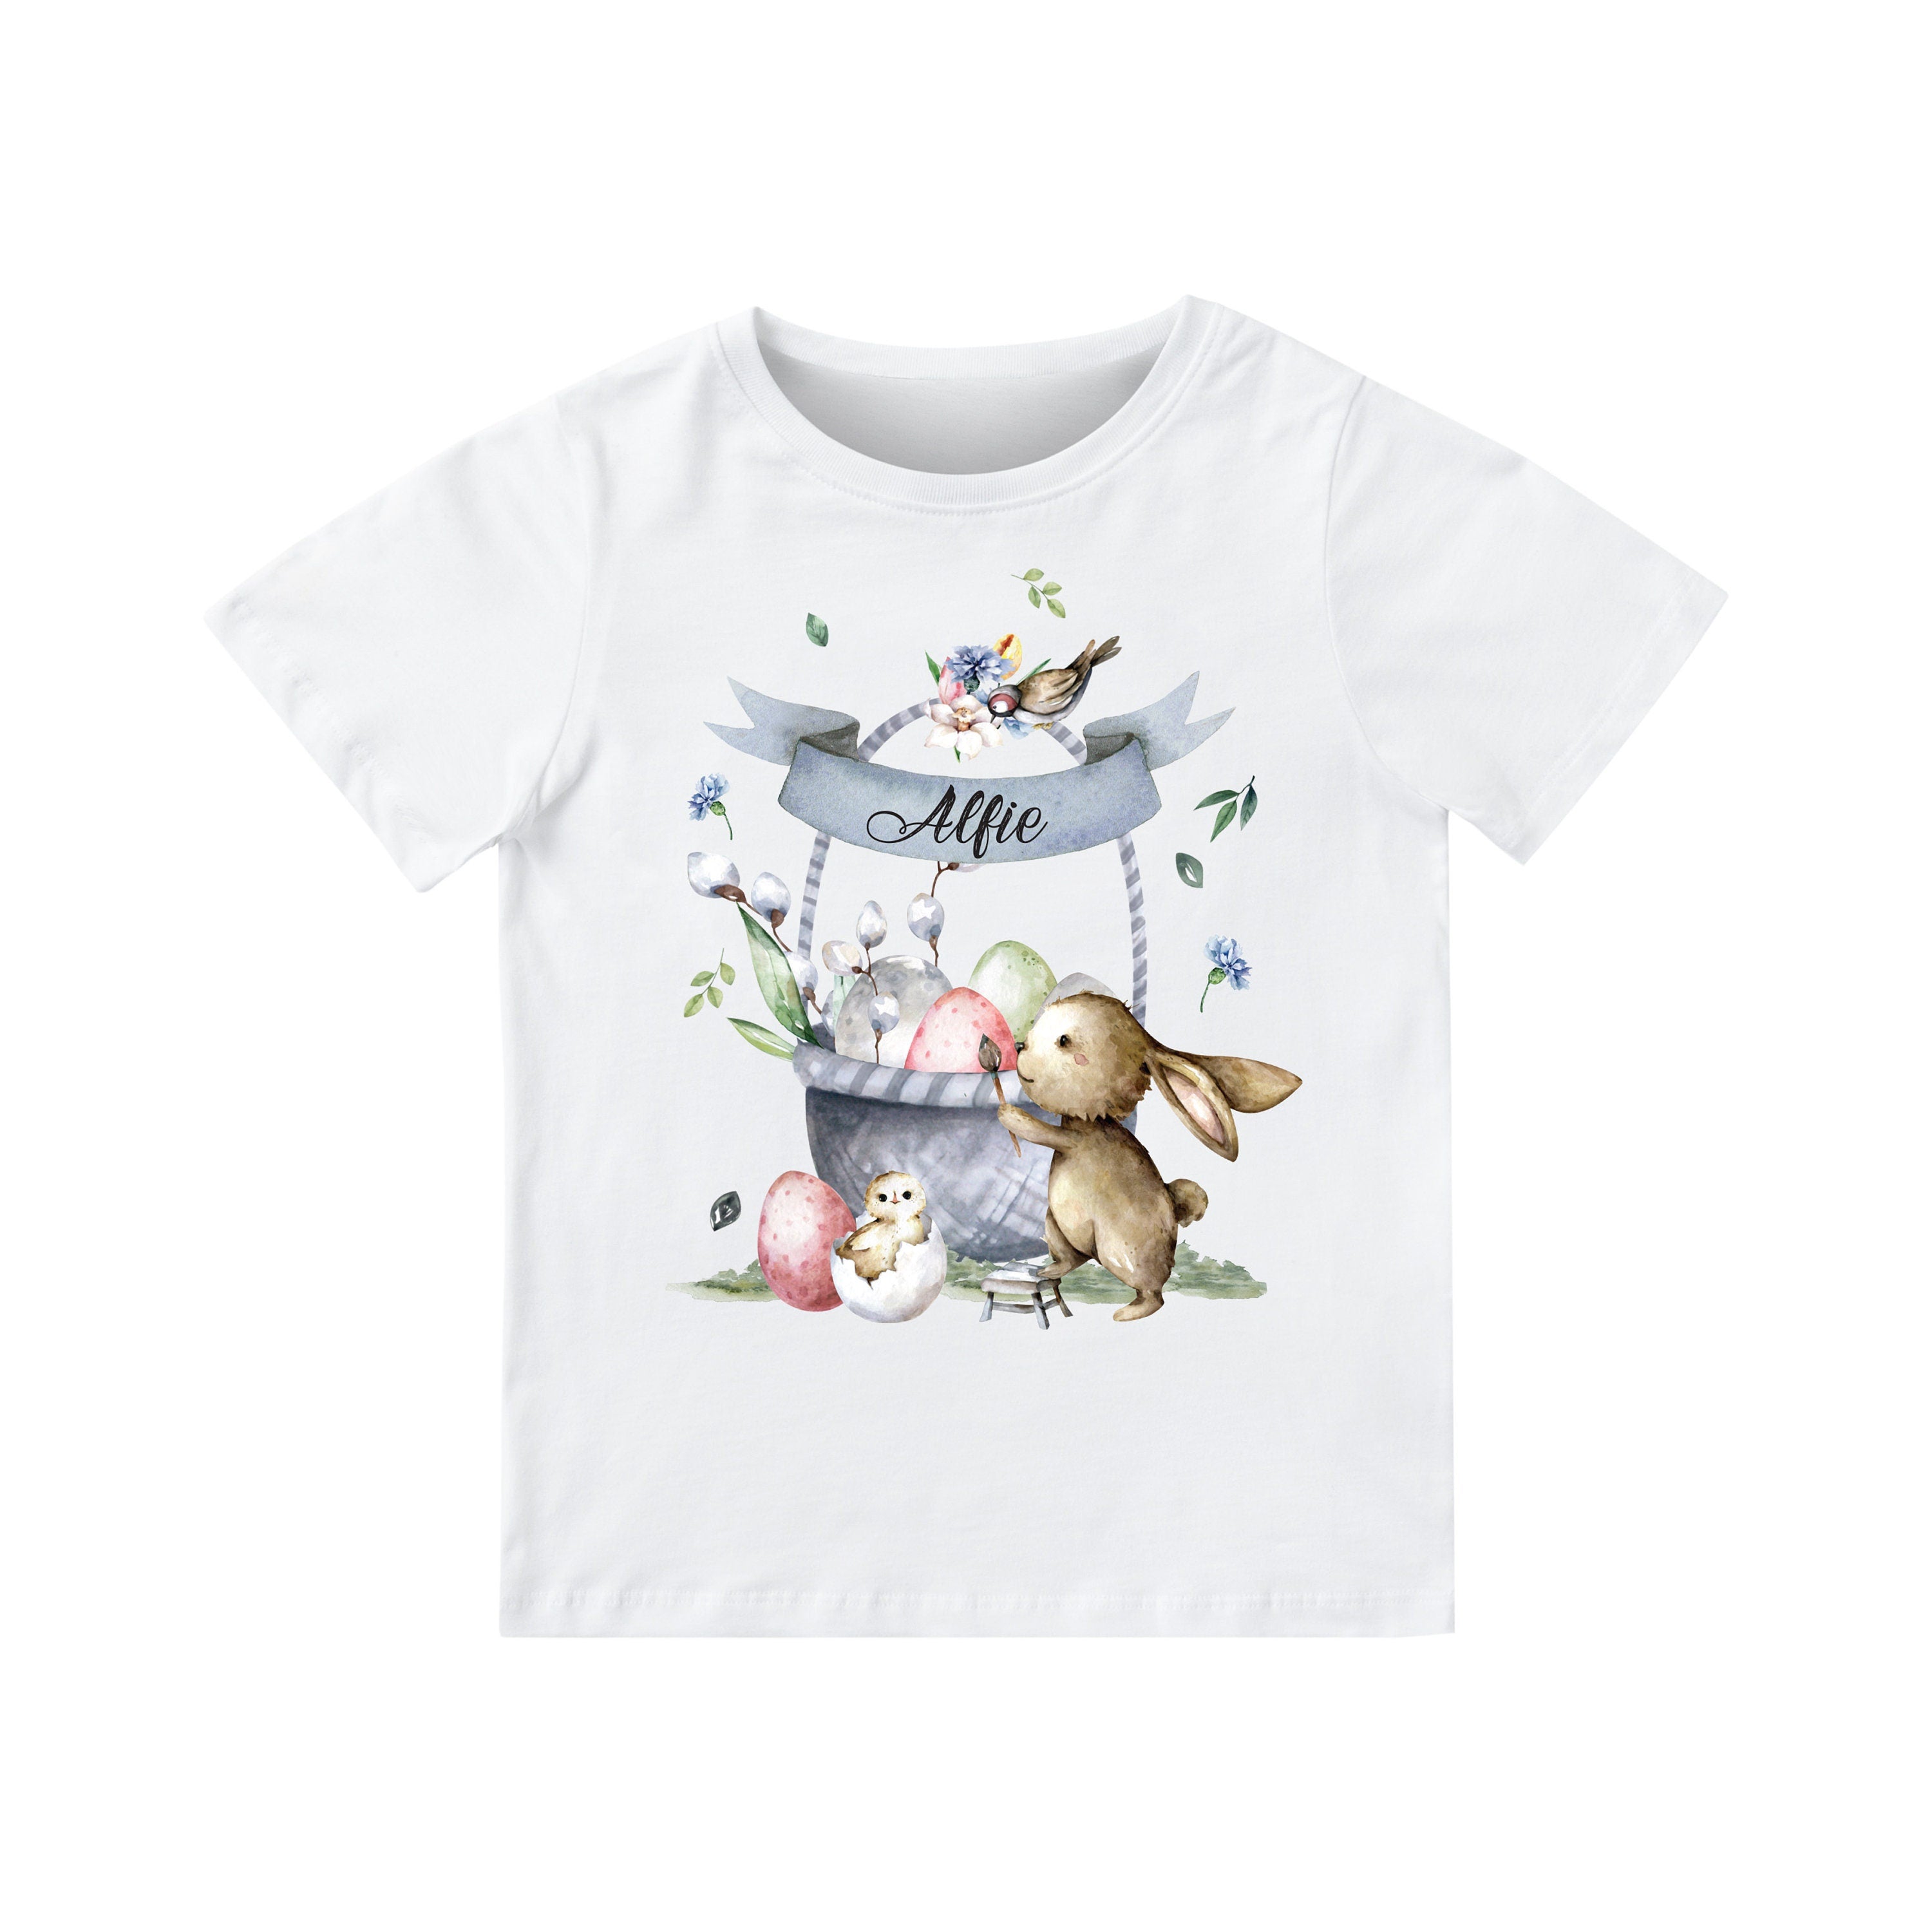 Personalised Easter T-Shirt for Kids with name, Baby boy girl design, Children 1st Gift